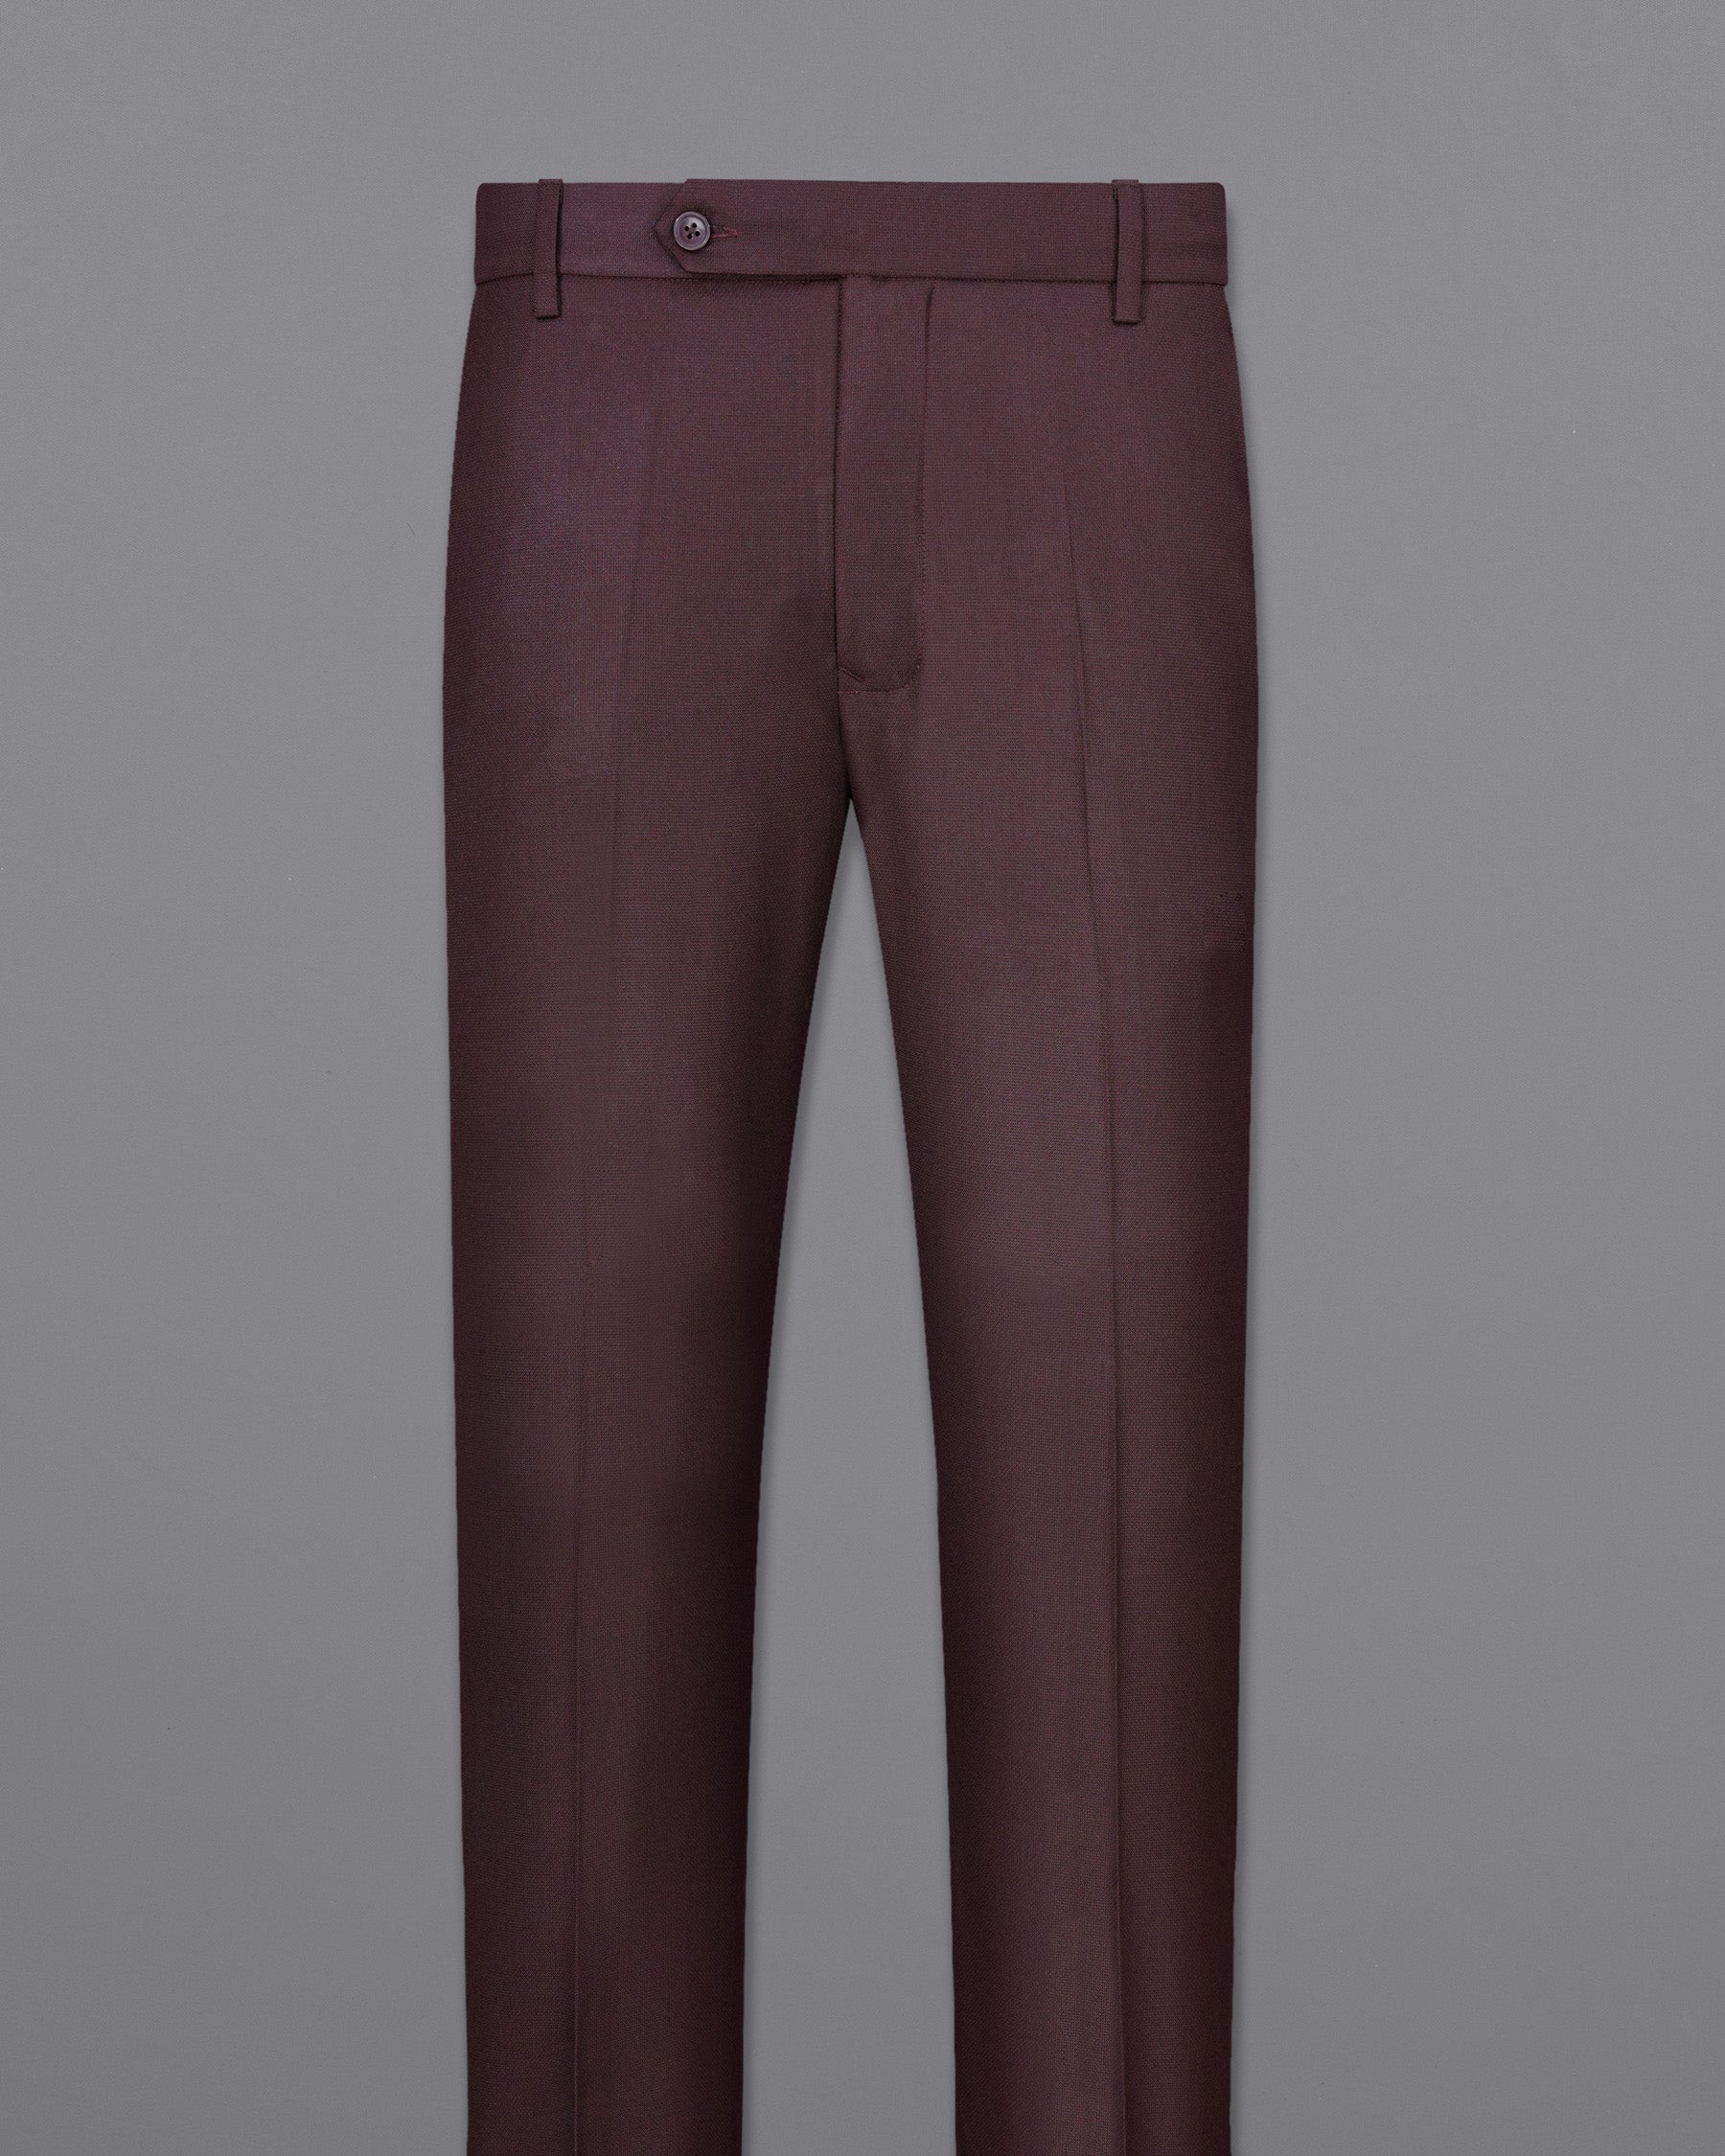 Taupe Maroon Textured Pant T2008-28, T2008-30, T2008-32, T2008-34, T2008-36, T2008-38, T2008-40, T2008-42, T2008-44